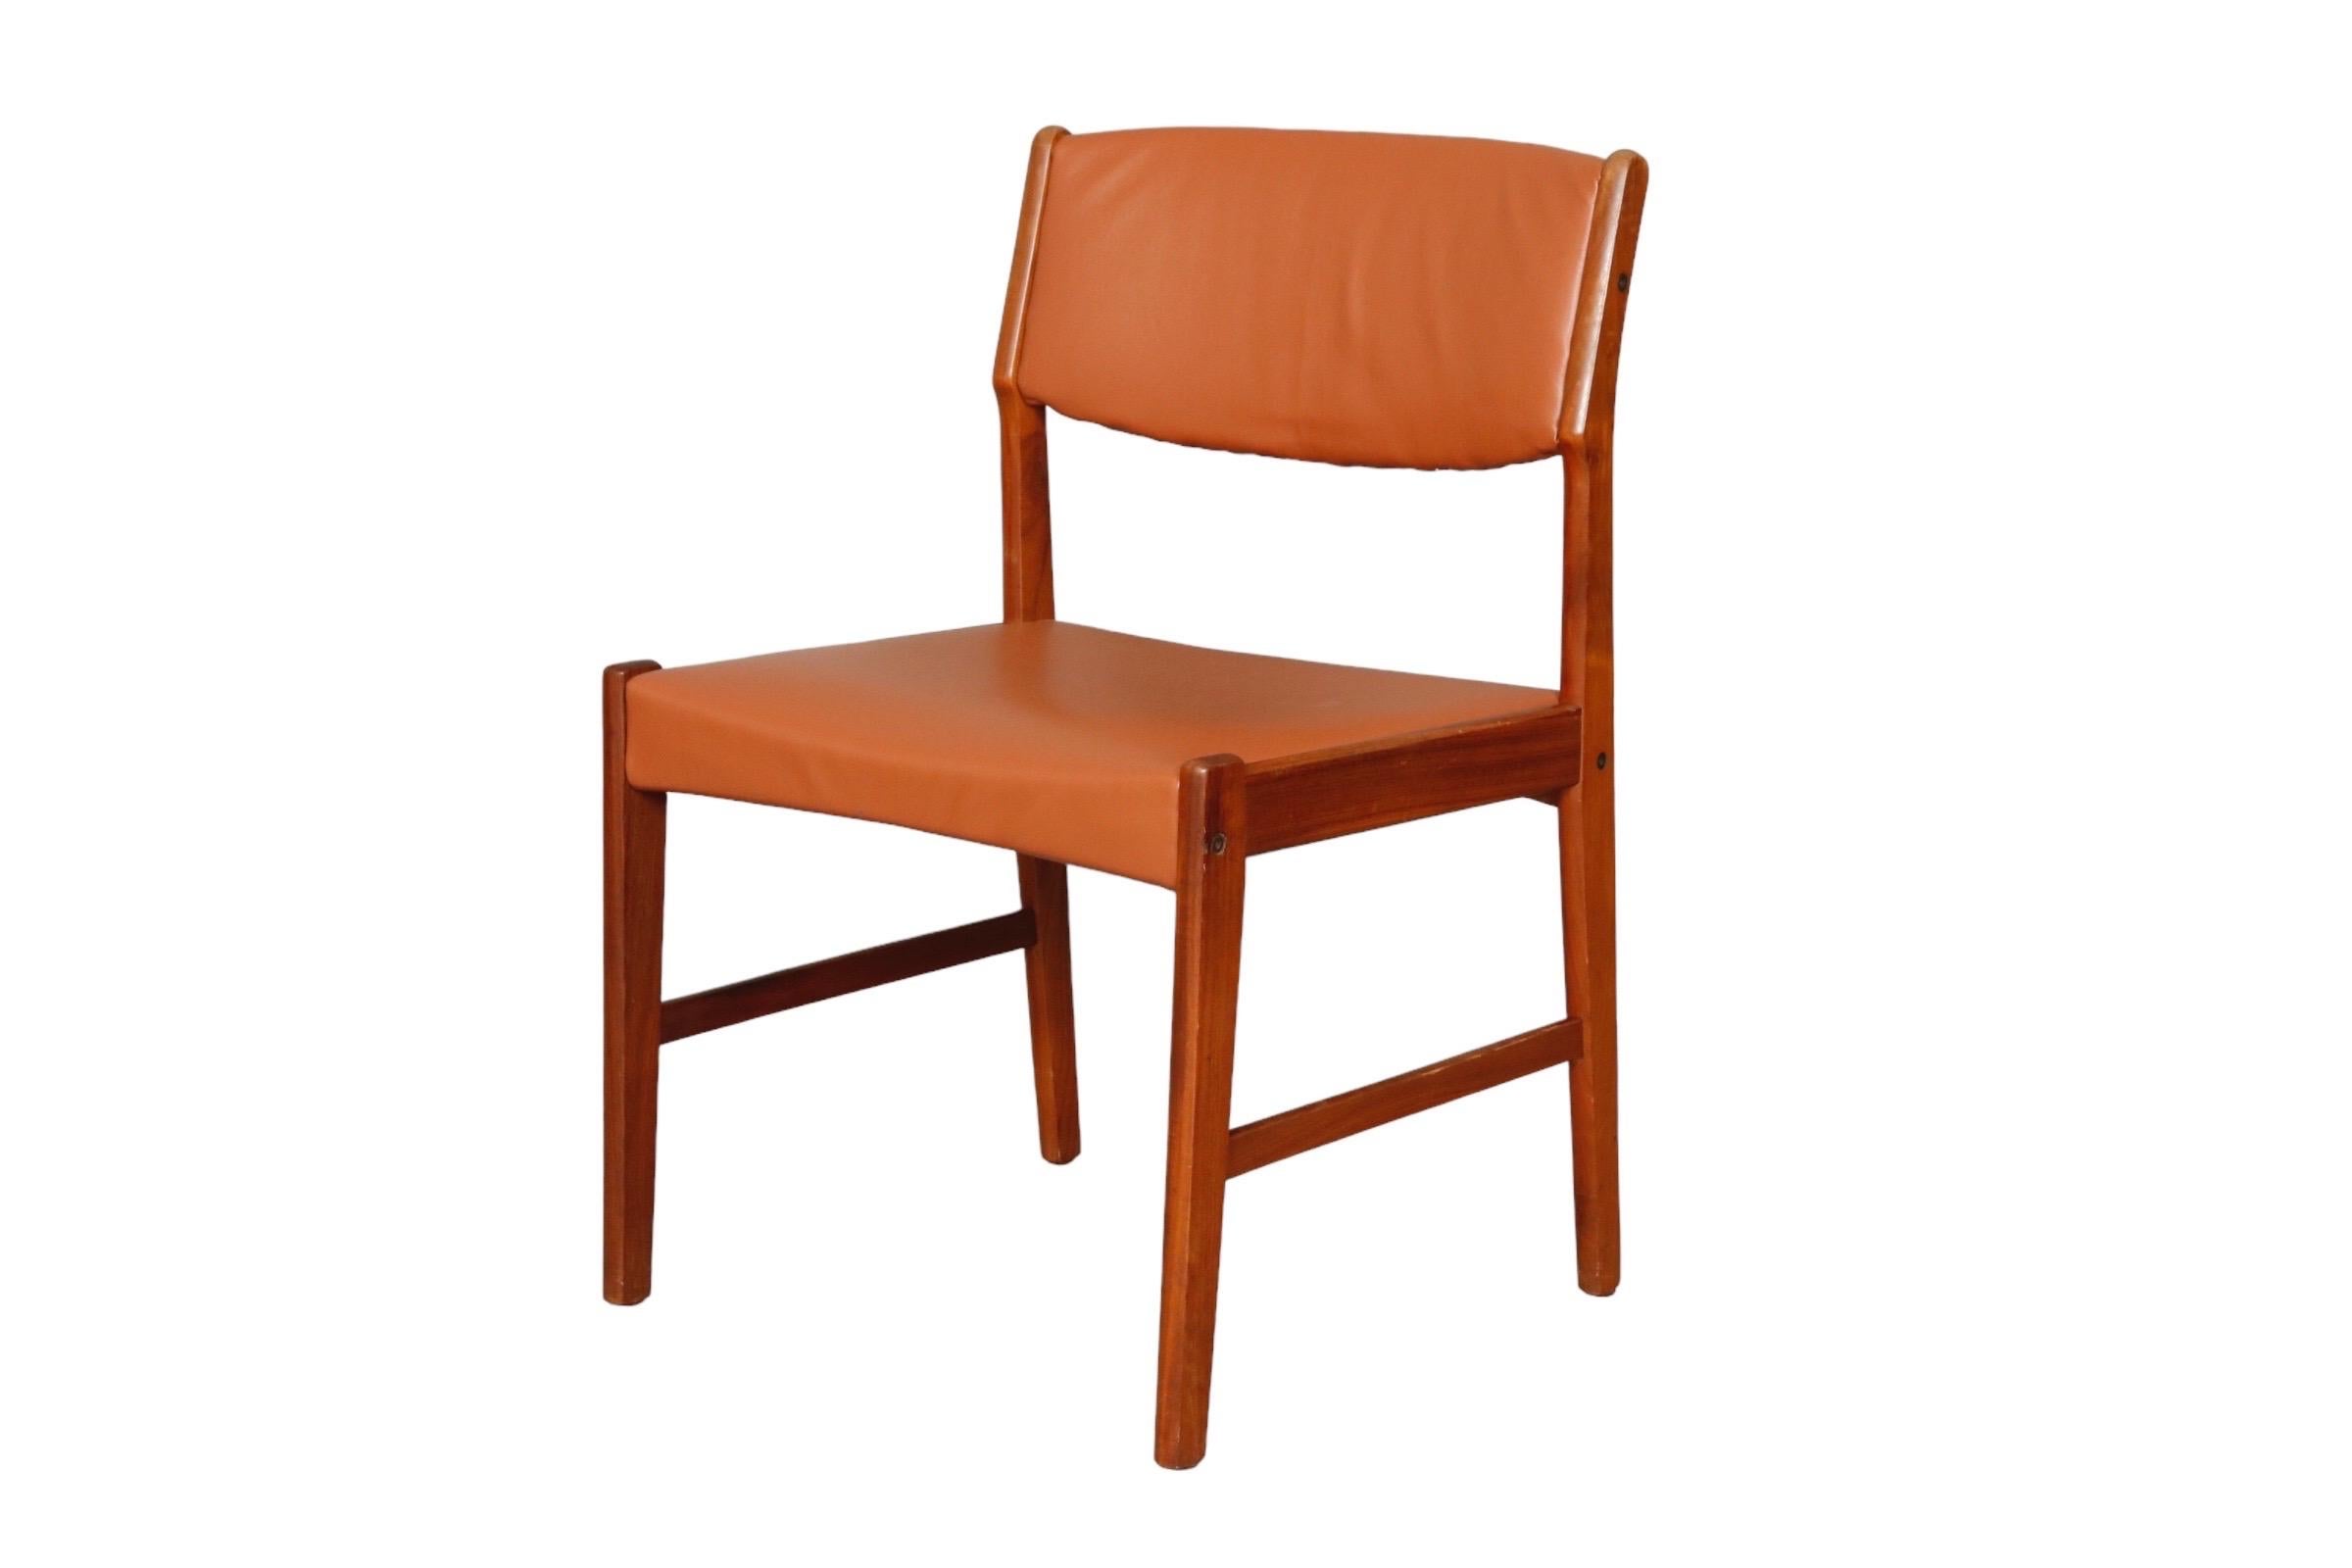 Set of 6 Danish dining chairs in a classic mid century shape. Frames are made of teak with square seats and wide scoop backs upholstered in a cognac colored vinyl.